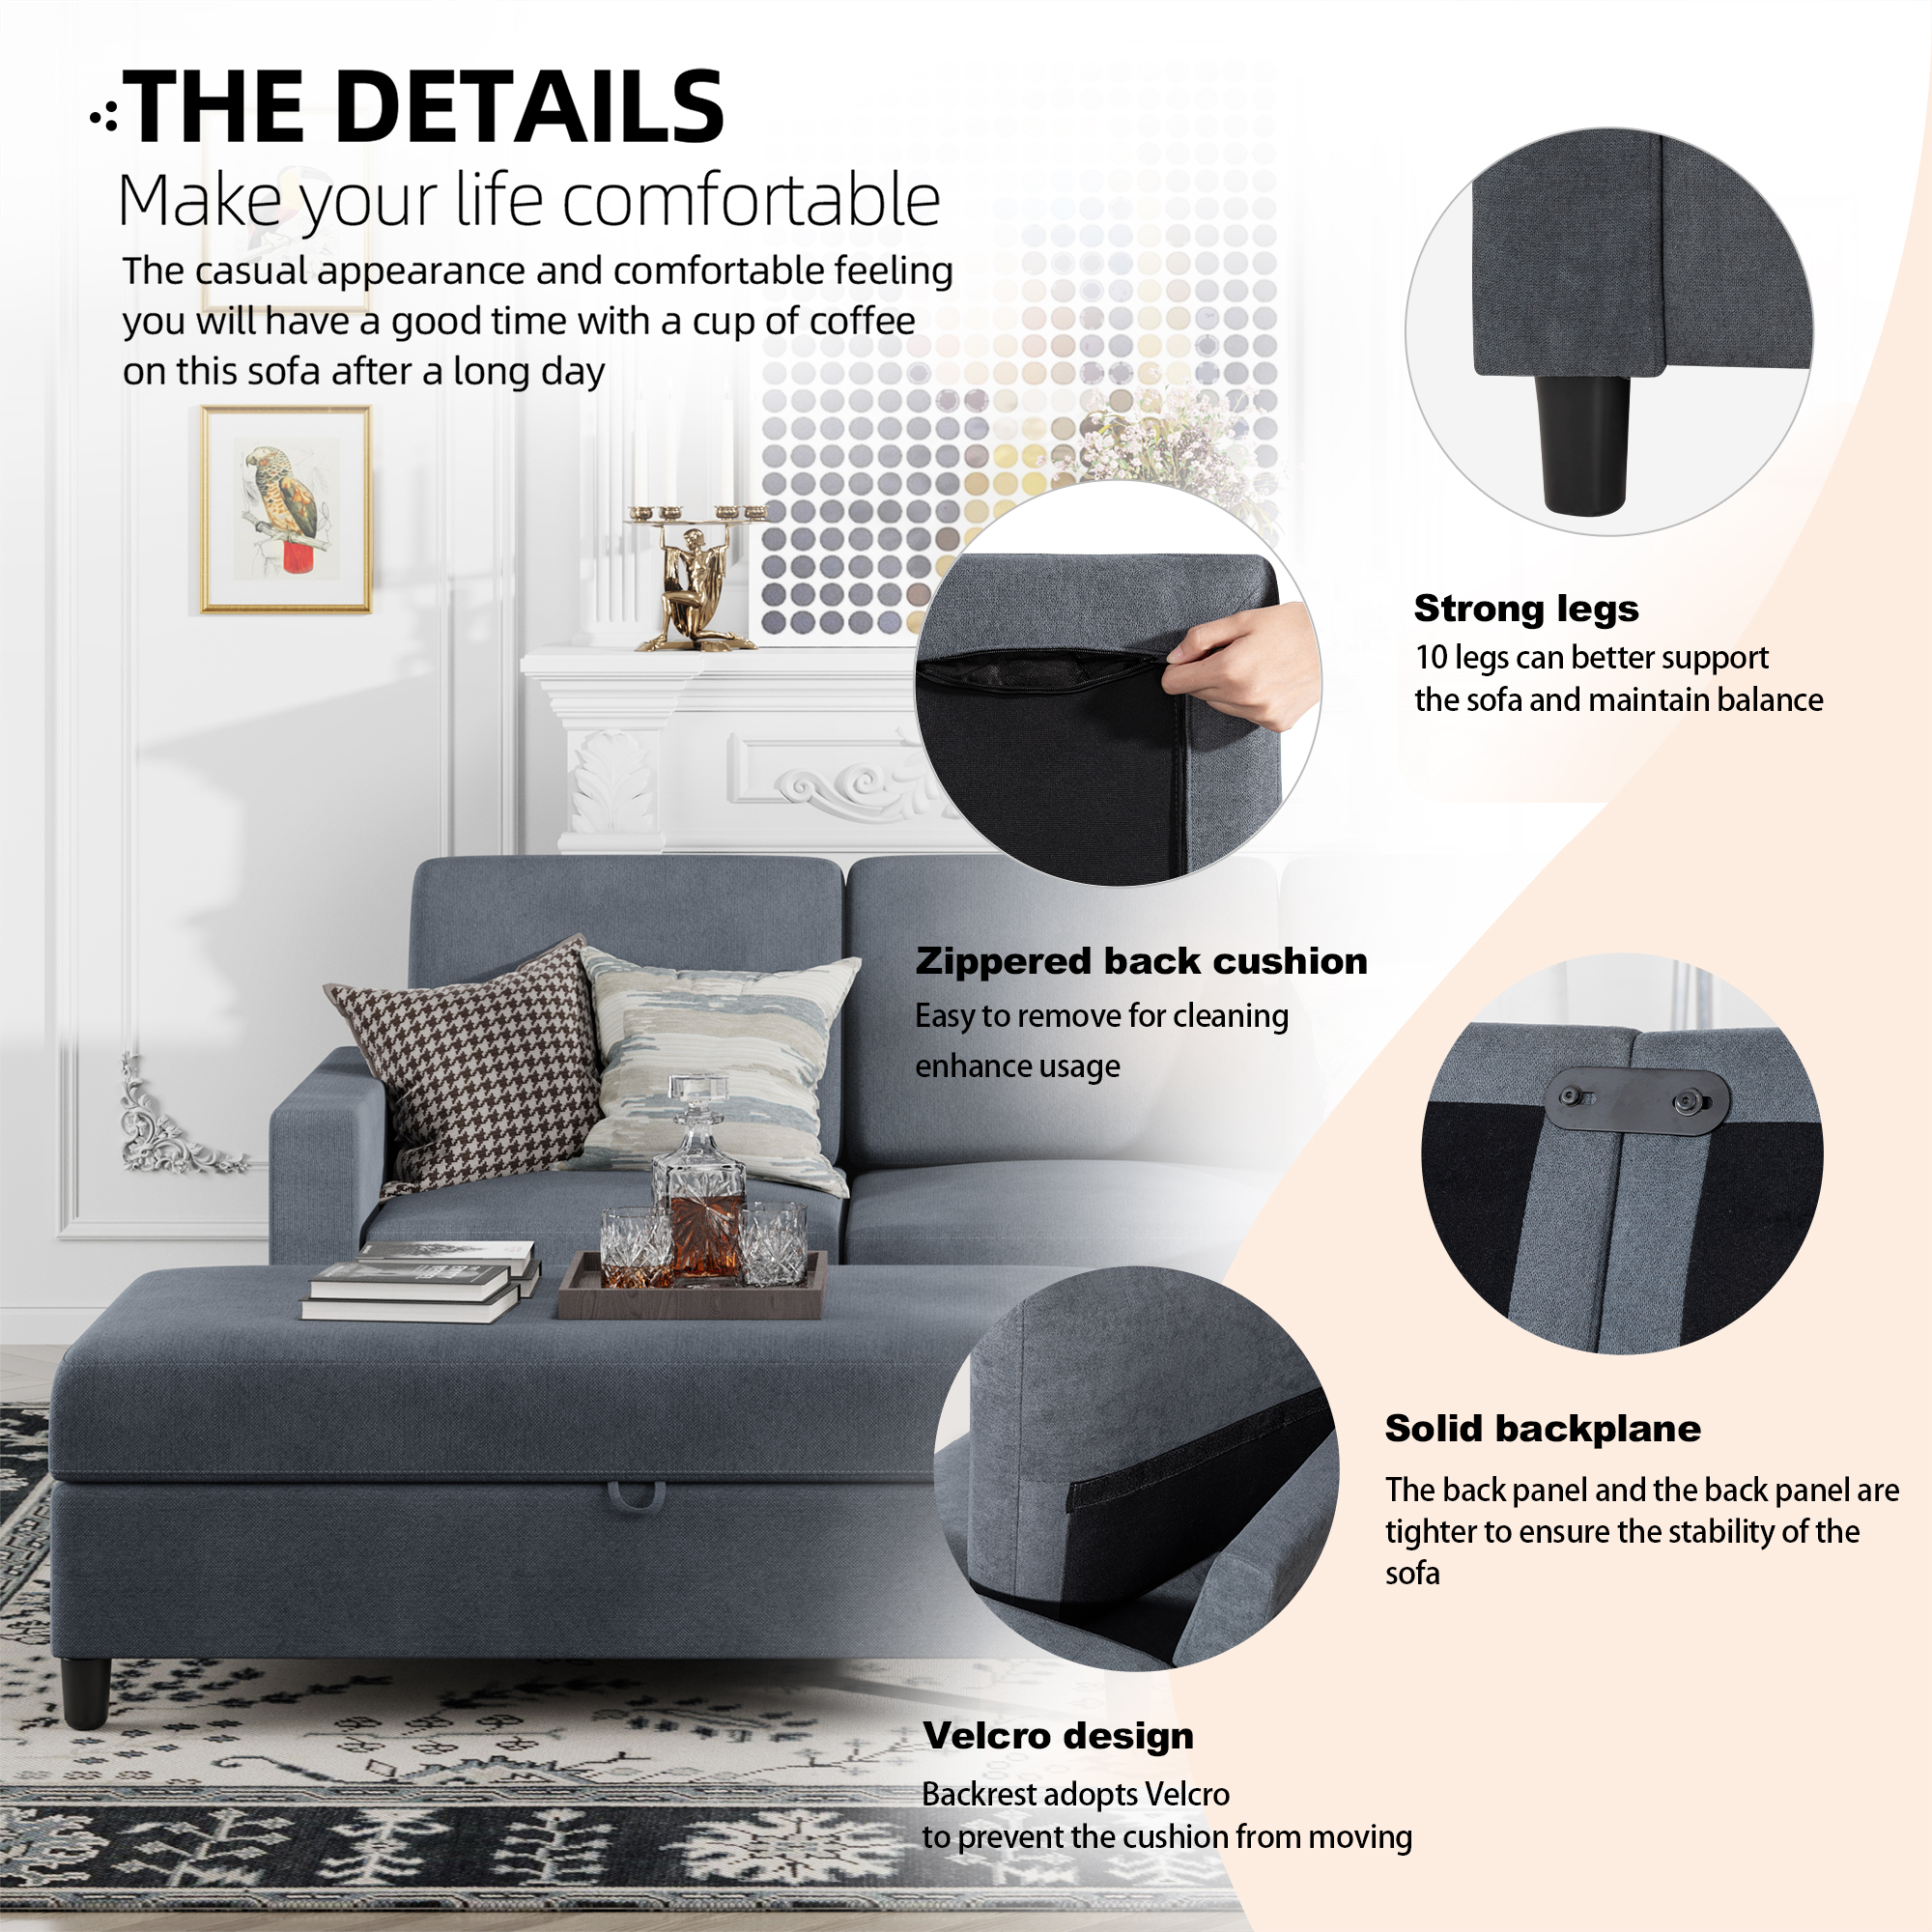 Walsunny Sectional Sofa bed Linen Couch L Shaped 4 Seat with Storage Ottoman Dark Gray - image 4 of 7